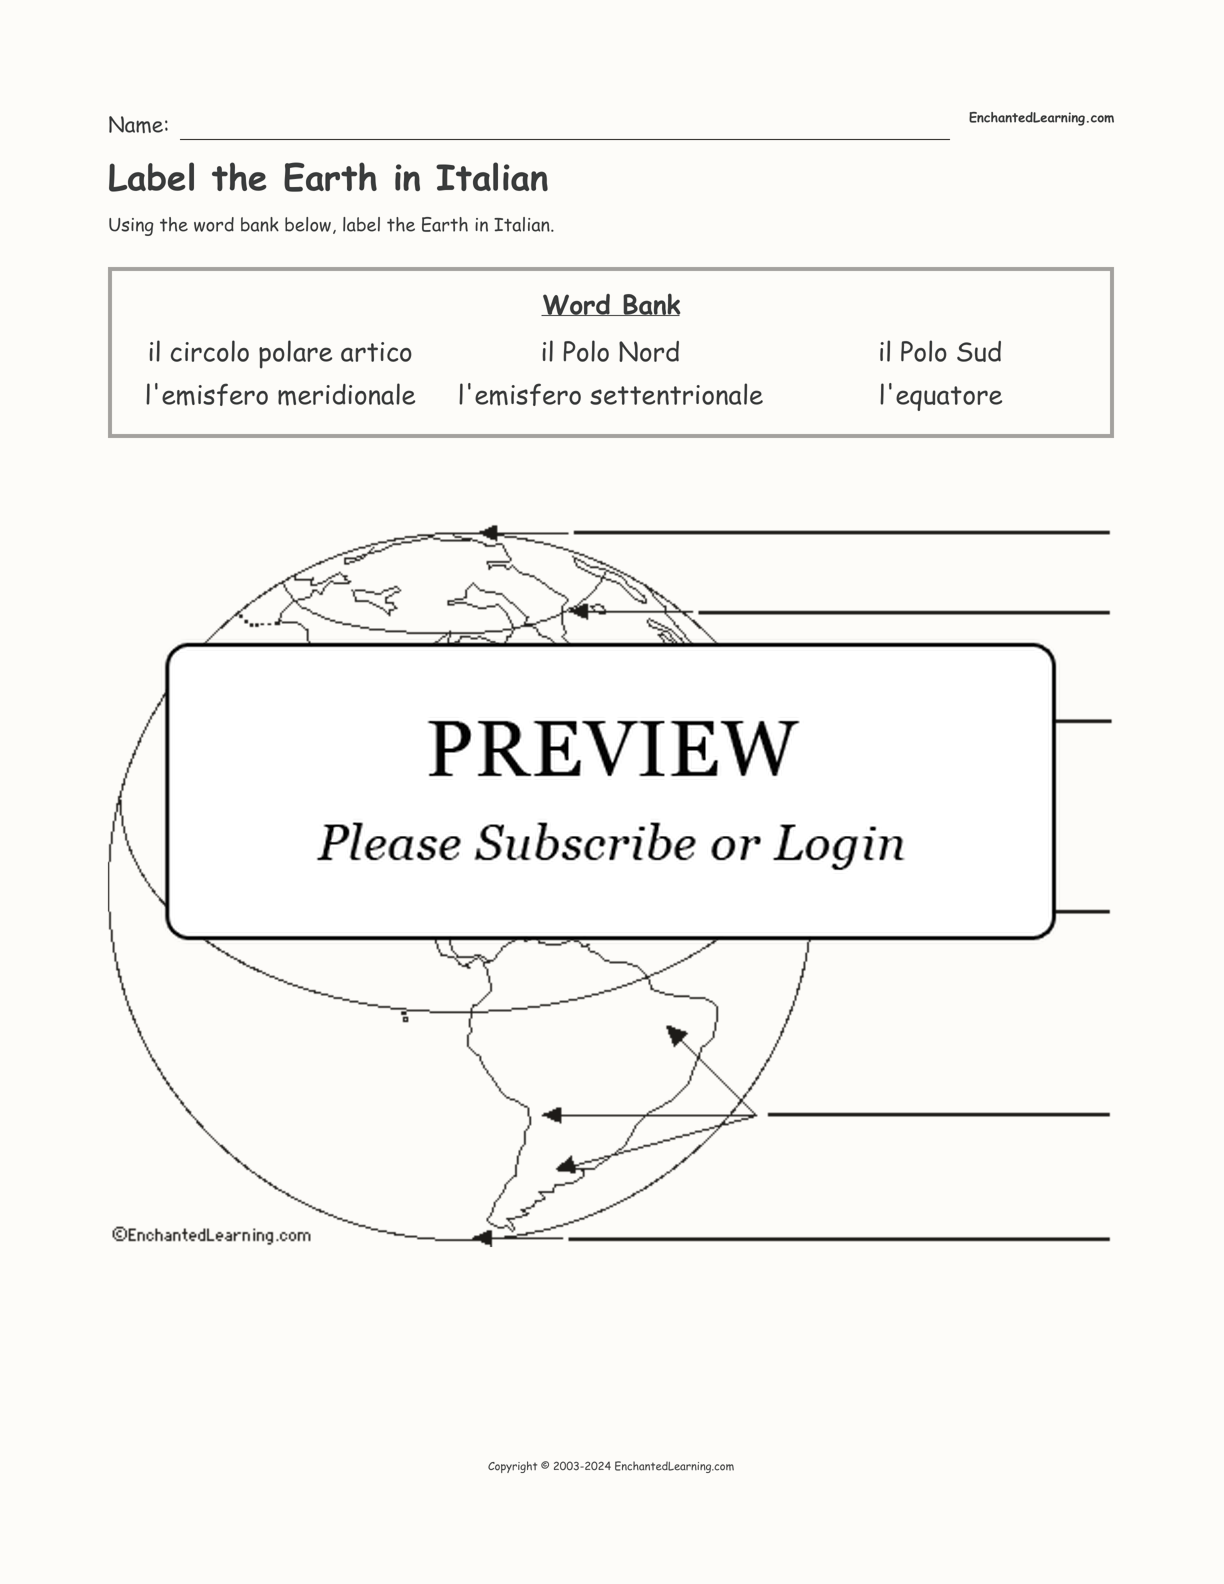 Label the Earth in Italian interactive worksheet page 1